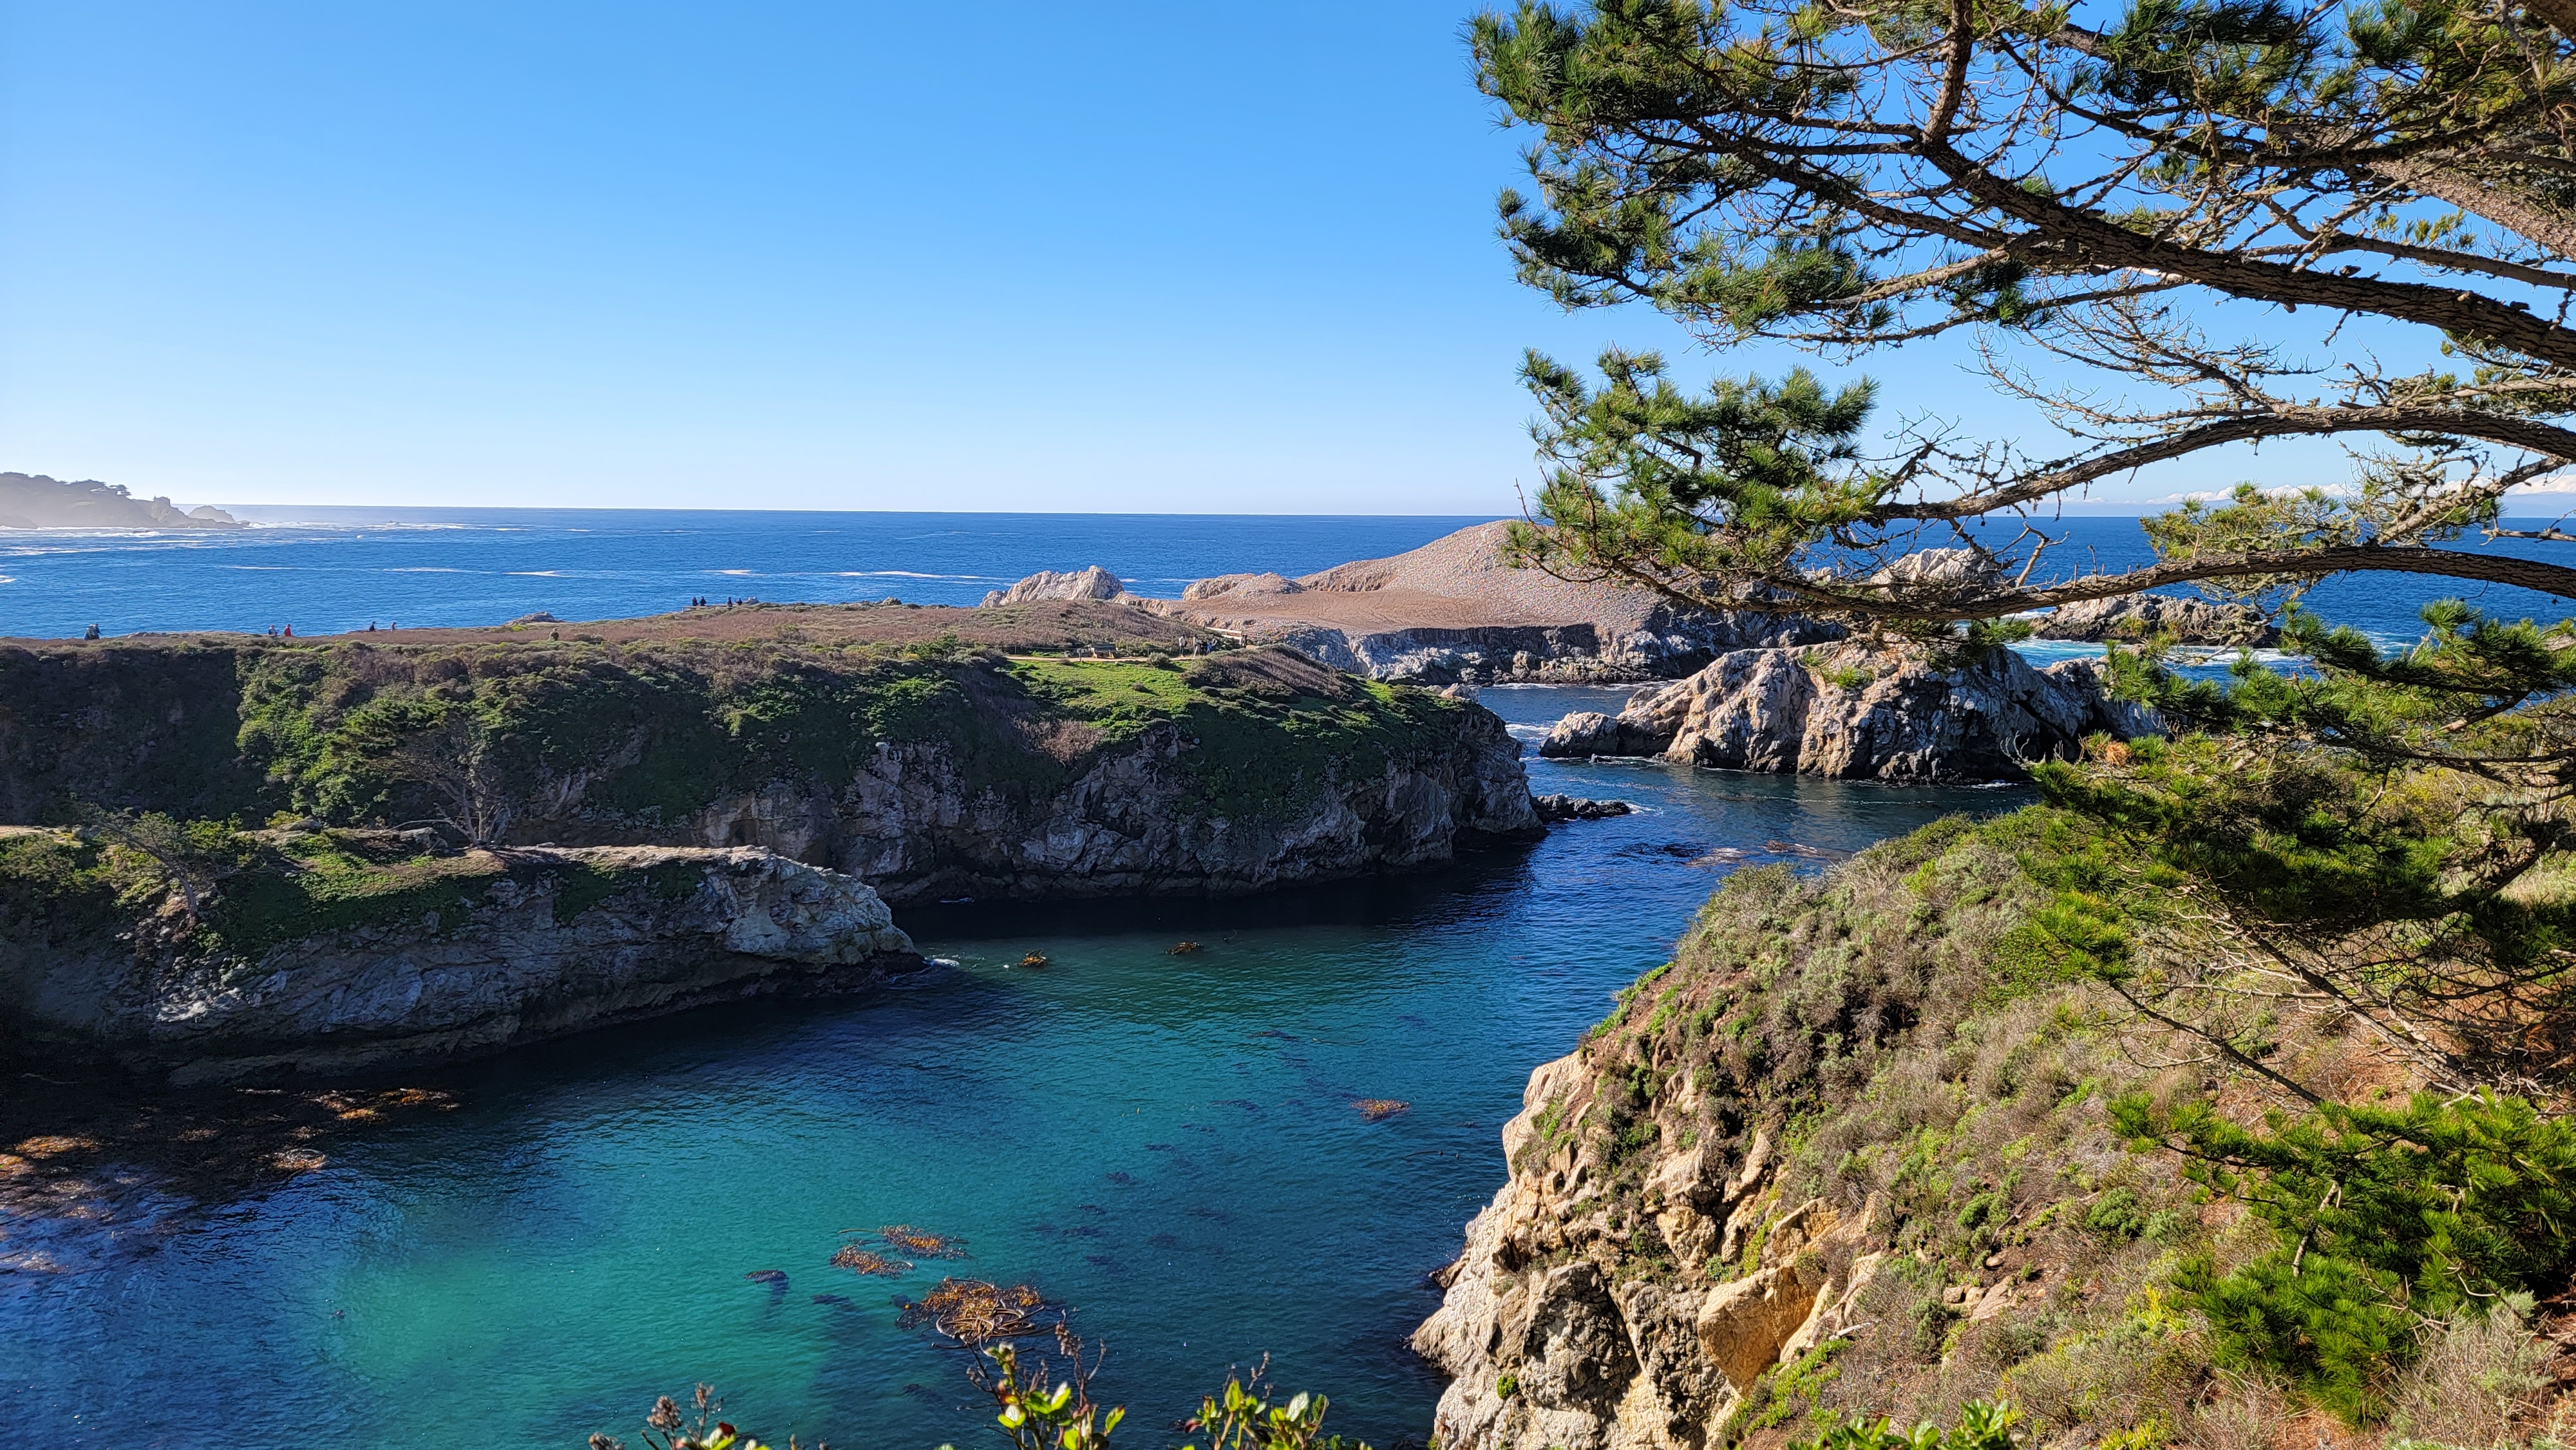 Point Lobos State Natural Reserve - Hiking the Highlights in one fun loop